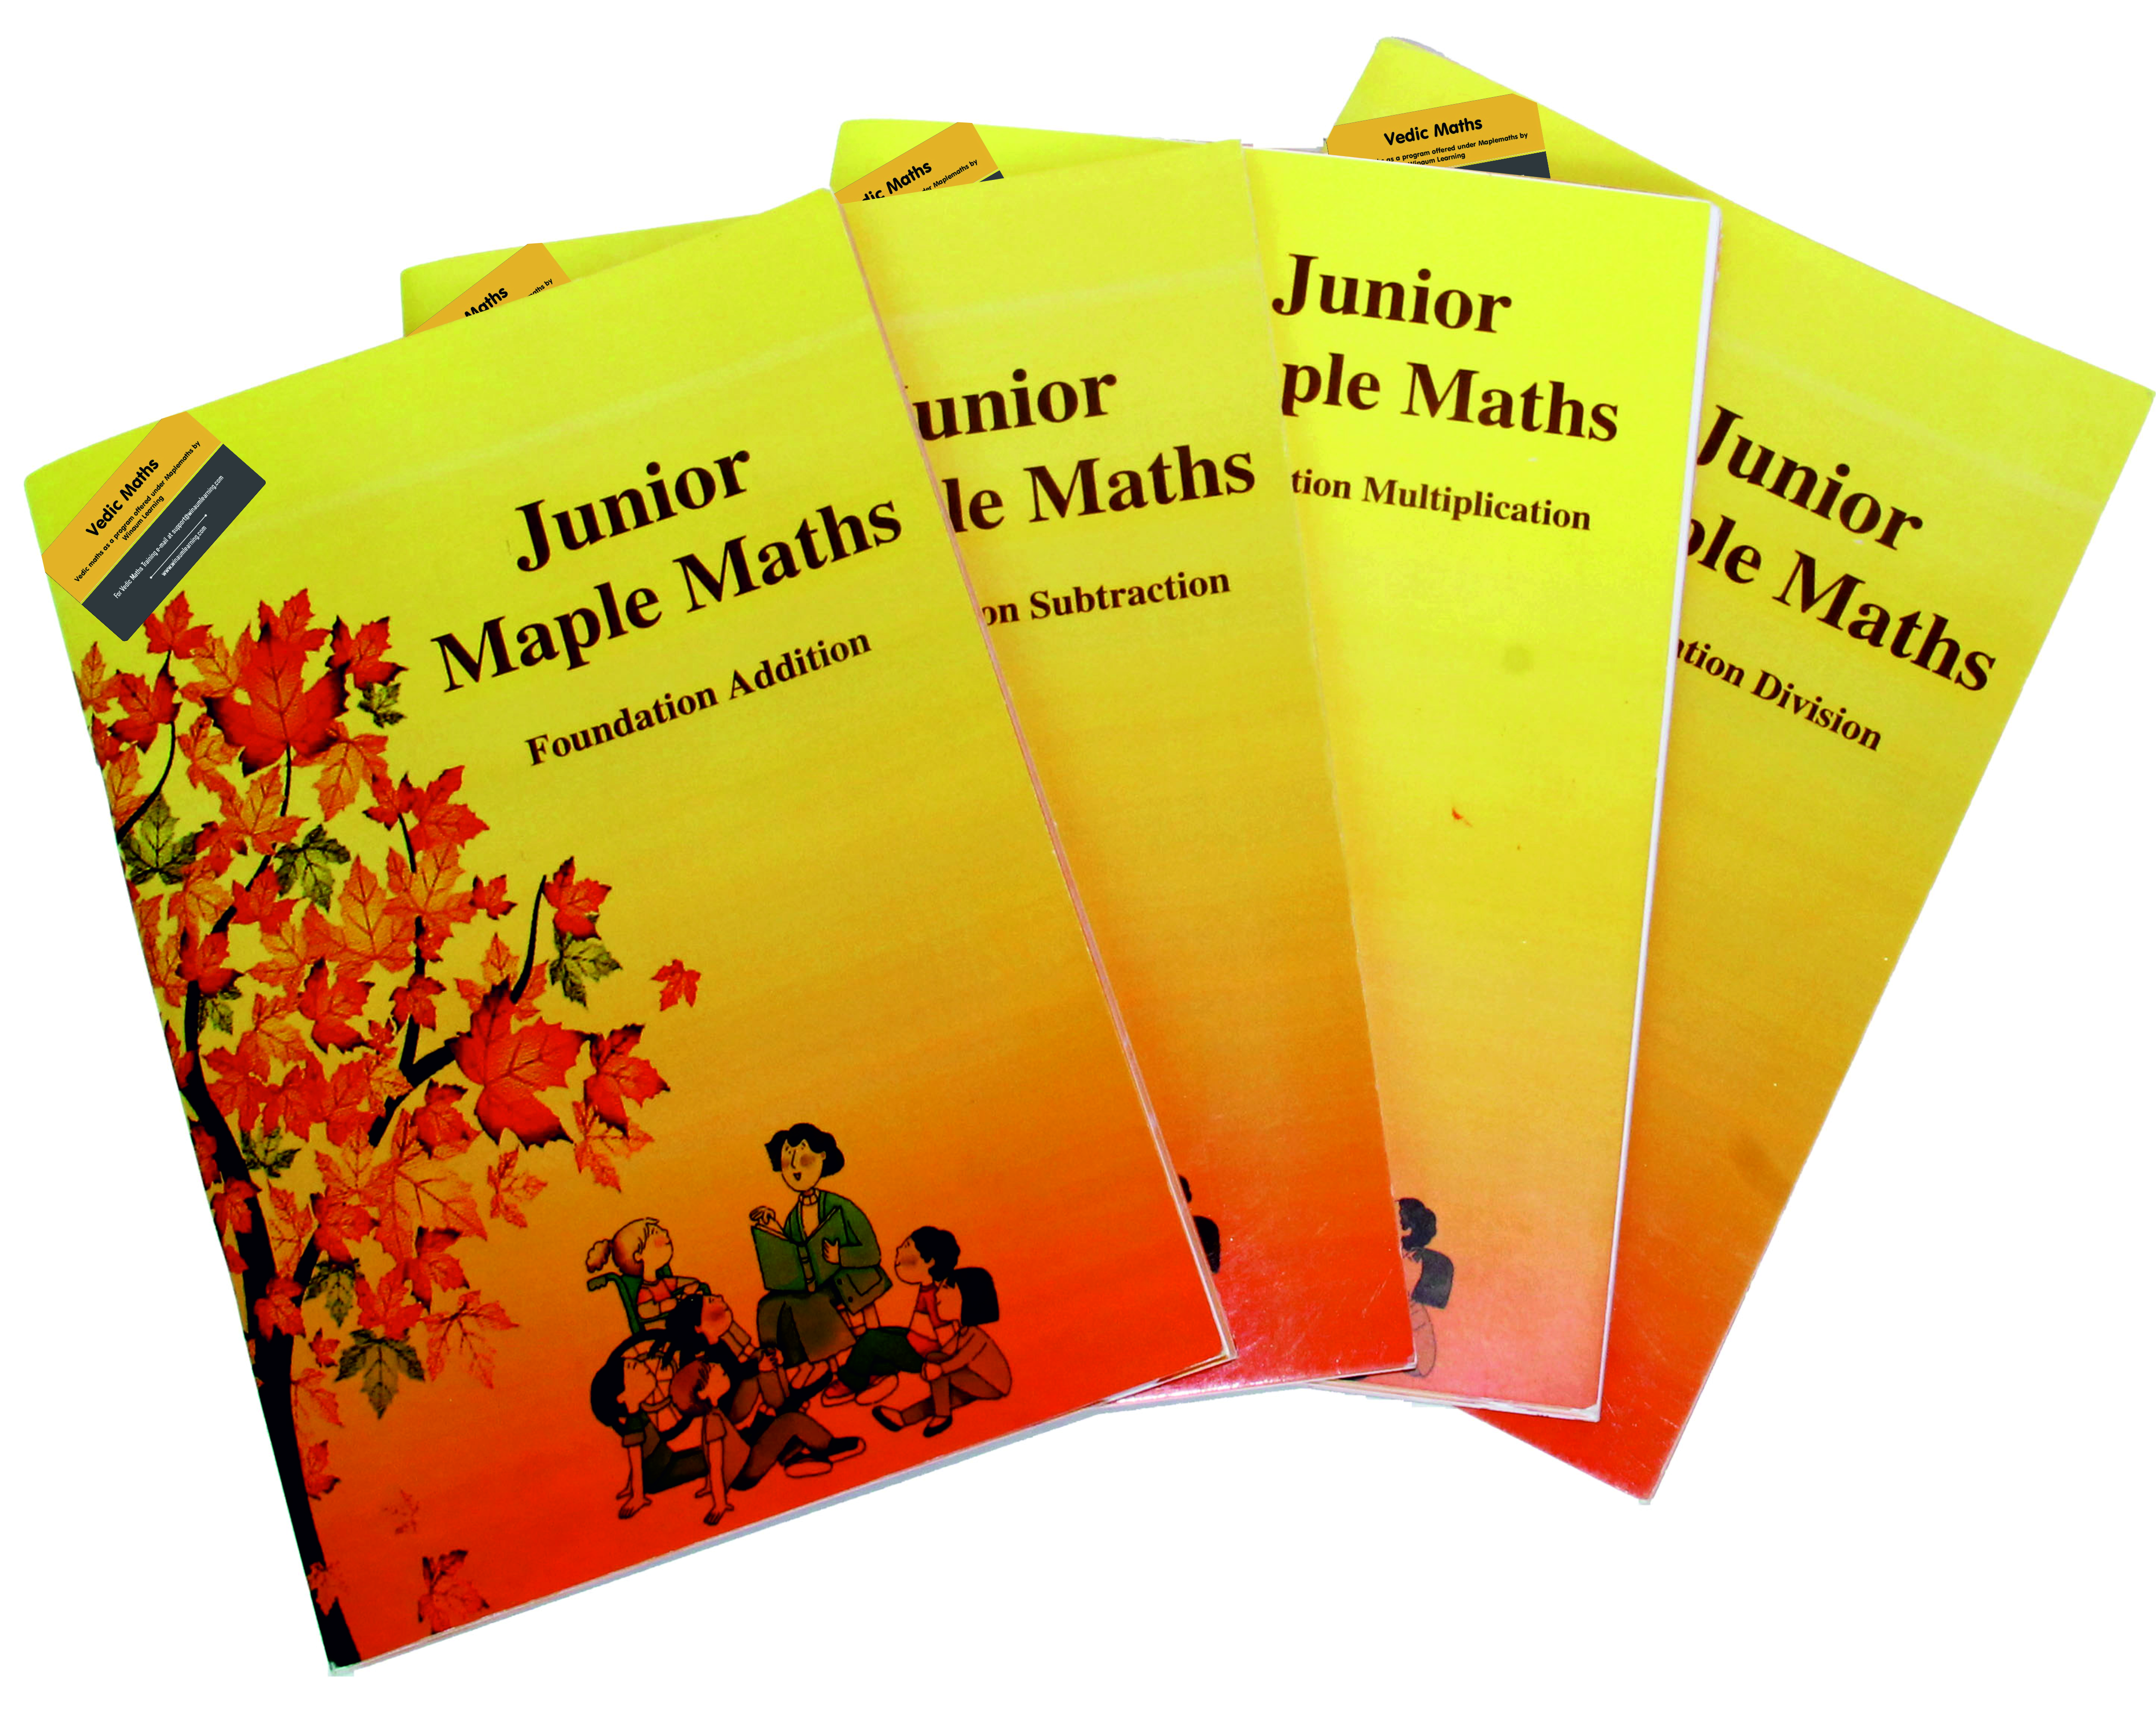 vedic maths book for junior students